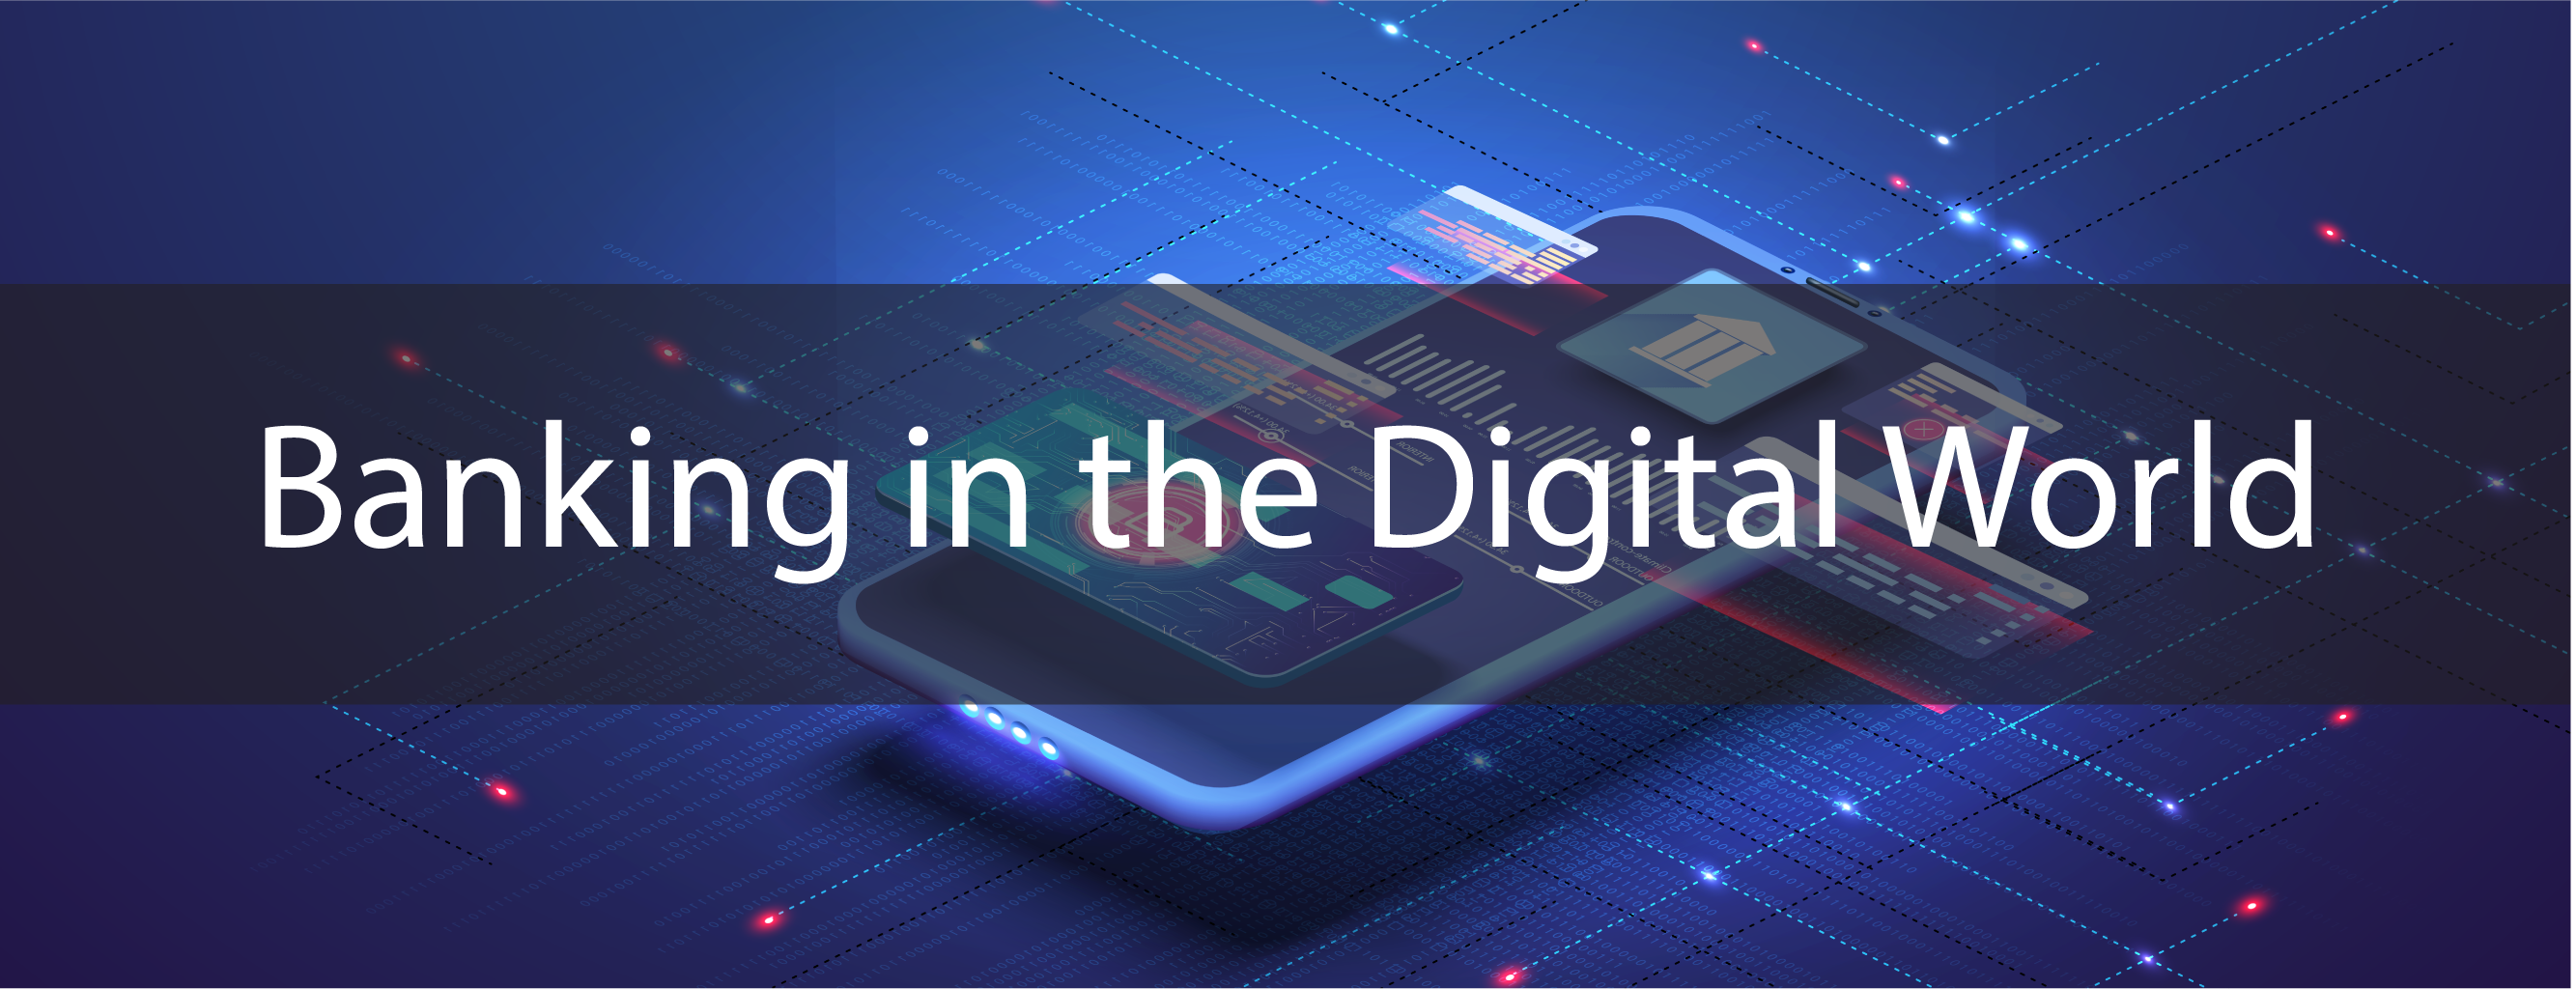 Digitizing the Banking Industry in a Fast-Moving World